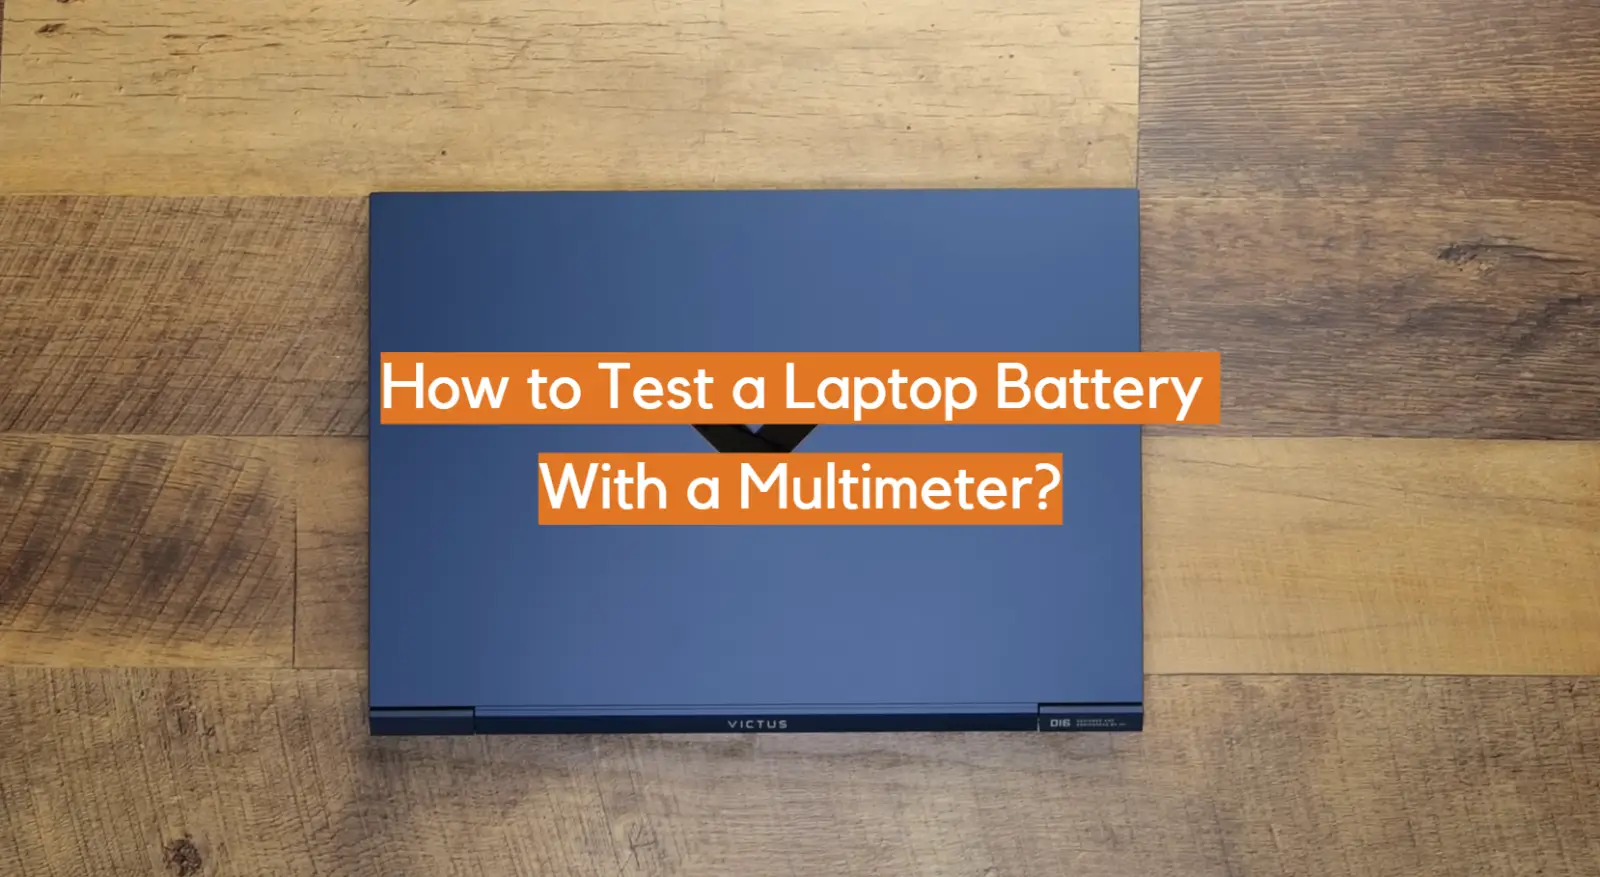 How to Test a Laptop Battery With a Multimeter?